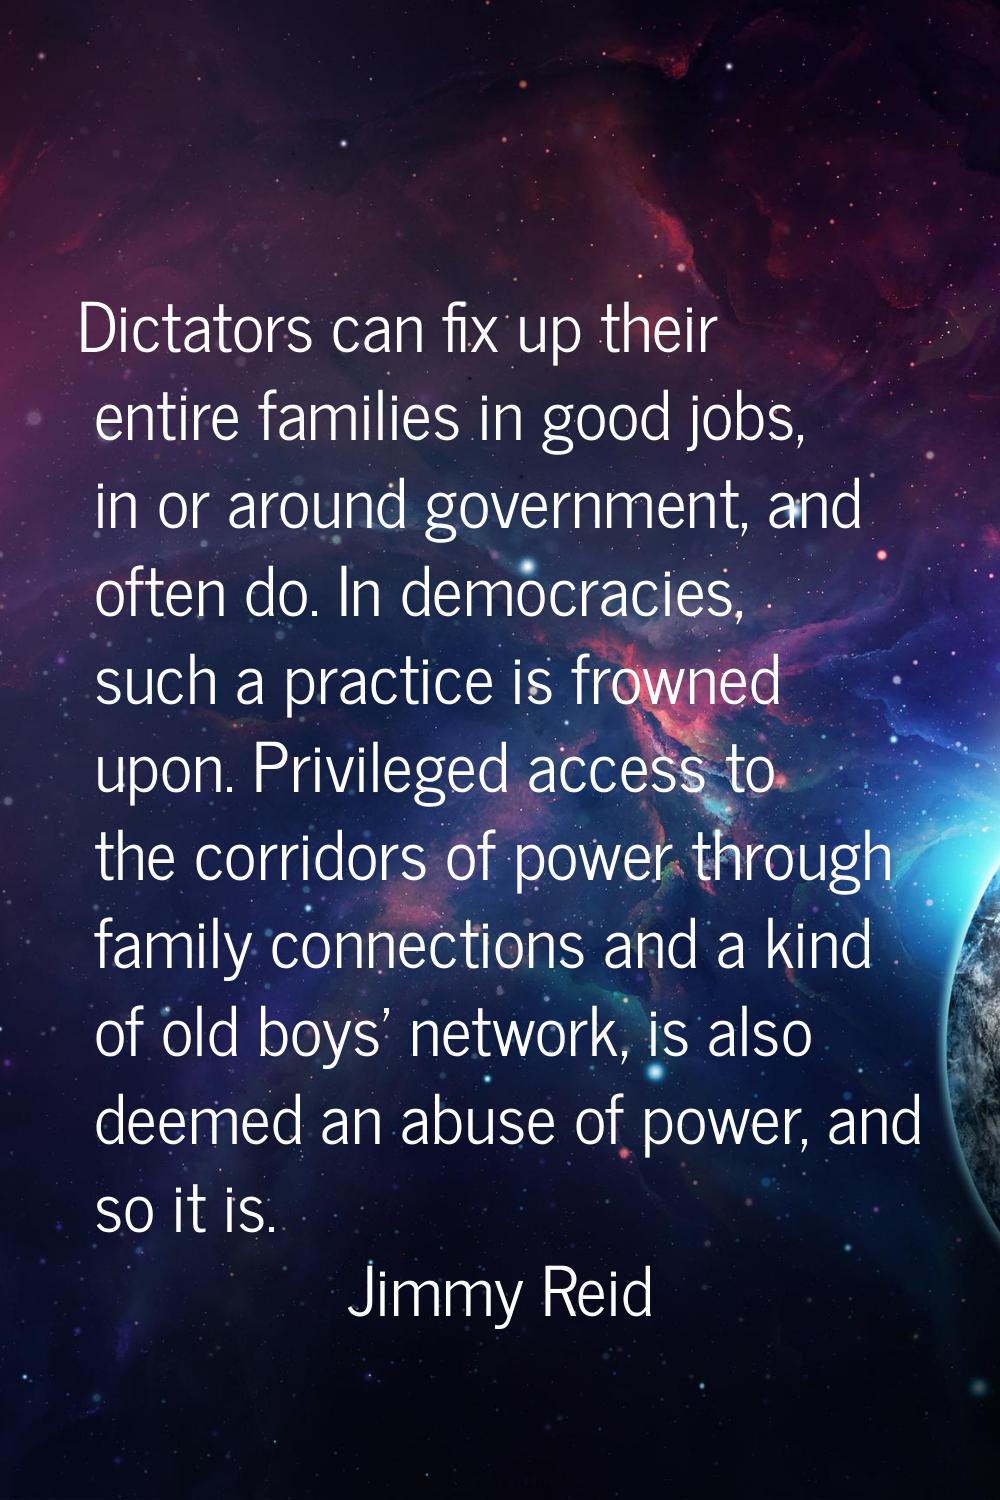 Dictators can fix up their entire families in good jobs, in or around government, and often do. In 